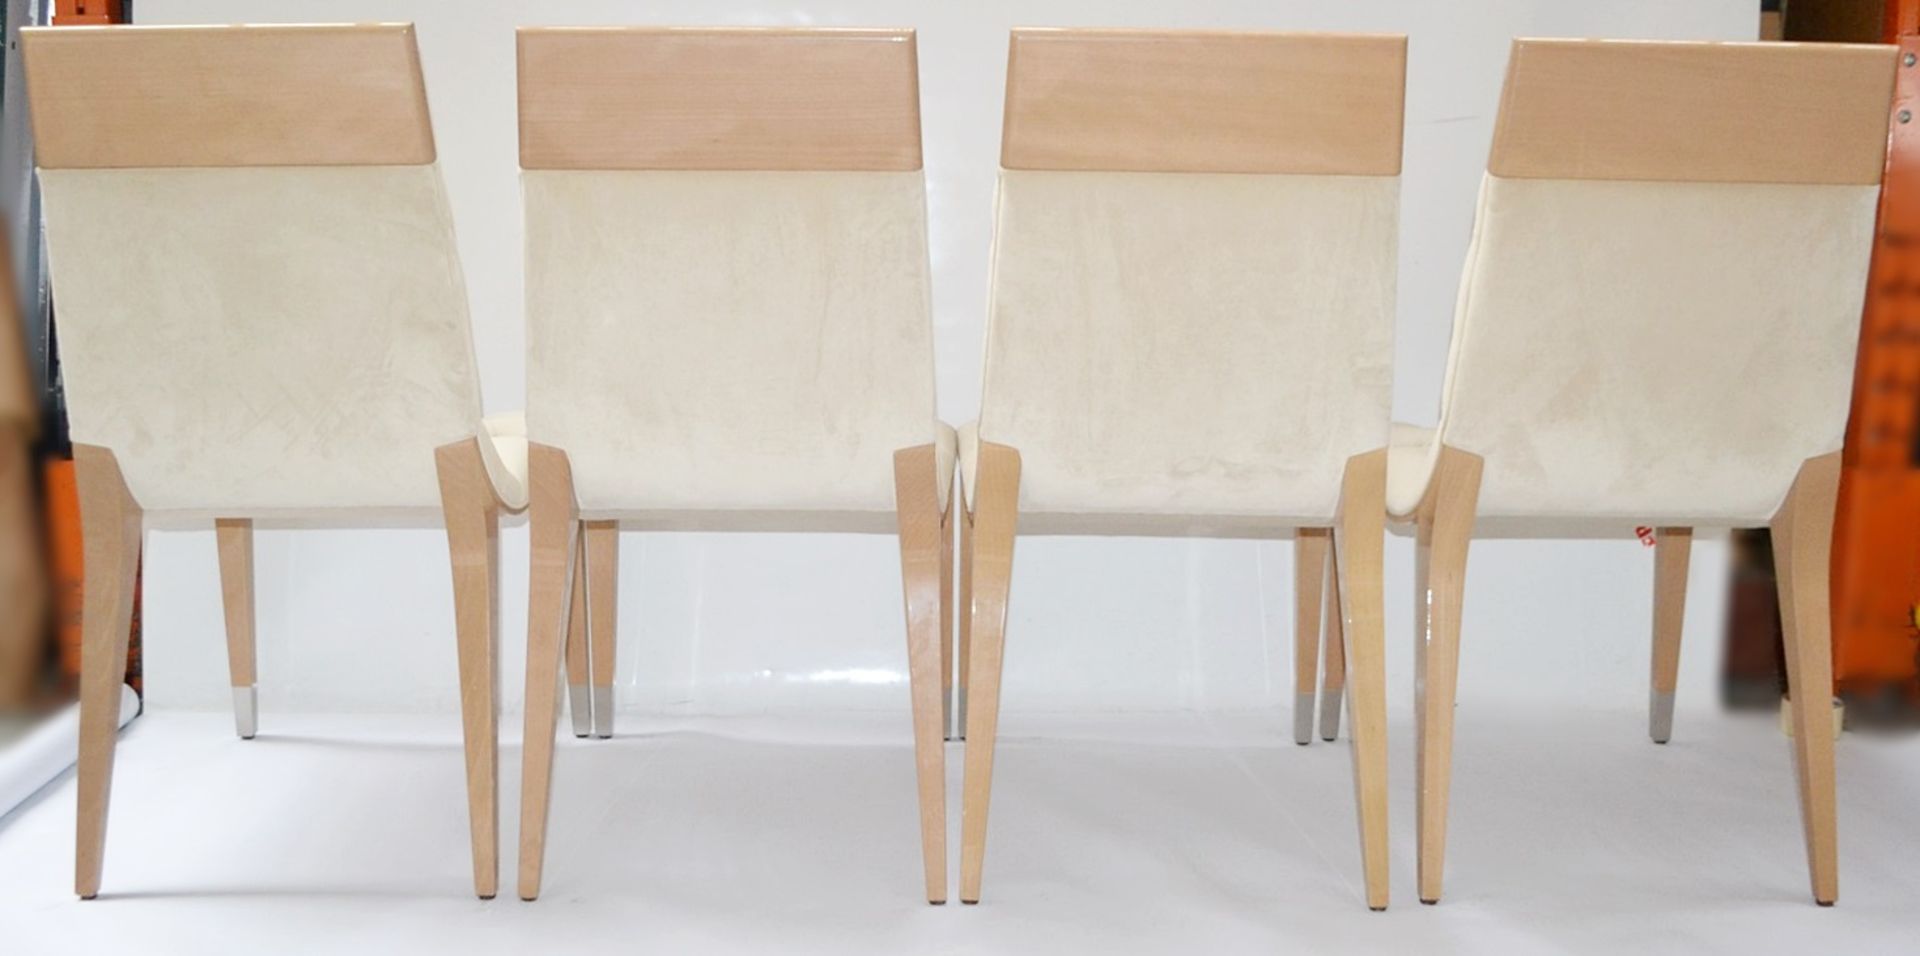 4 x GIORGIO COLLECTION 'Sunrise' Italian Designer Dining Chairs - Pre-owned In Good Condition - Image 5 of 14